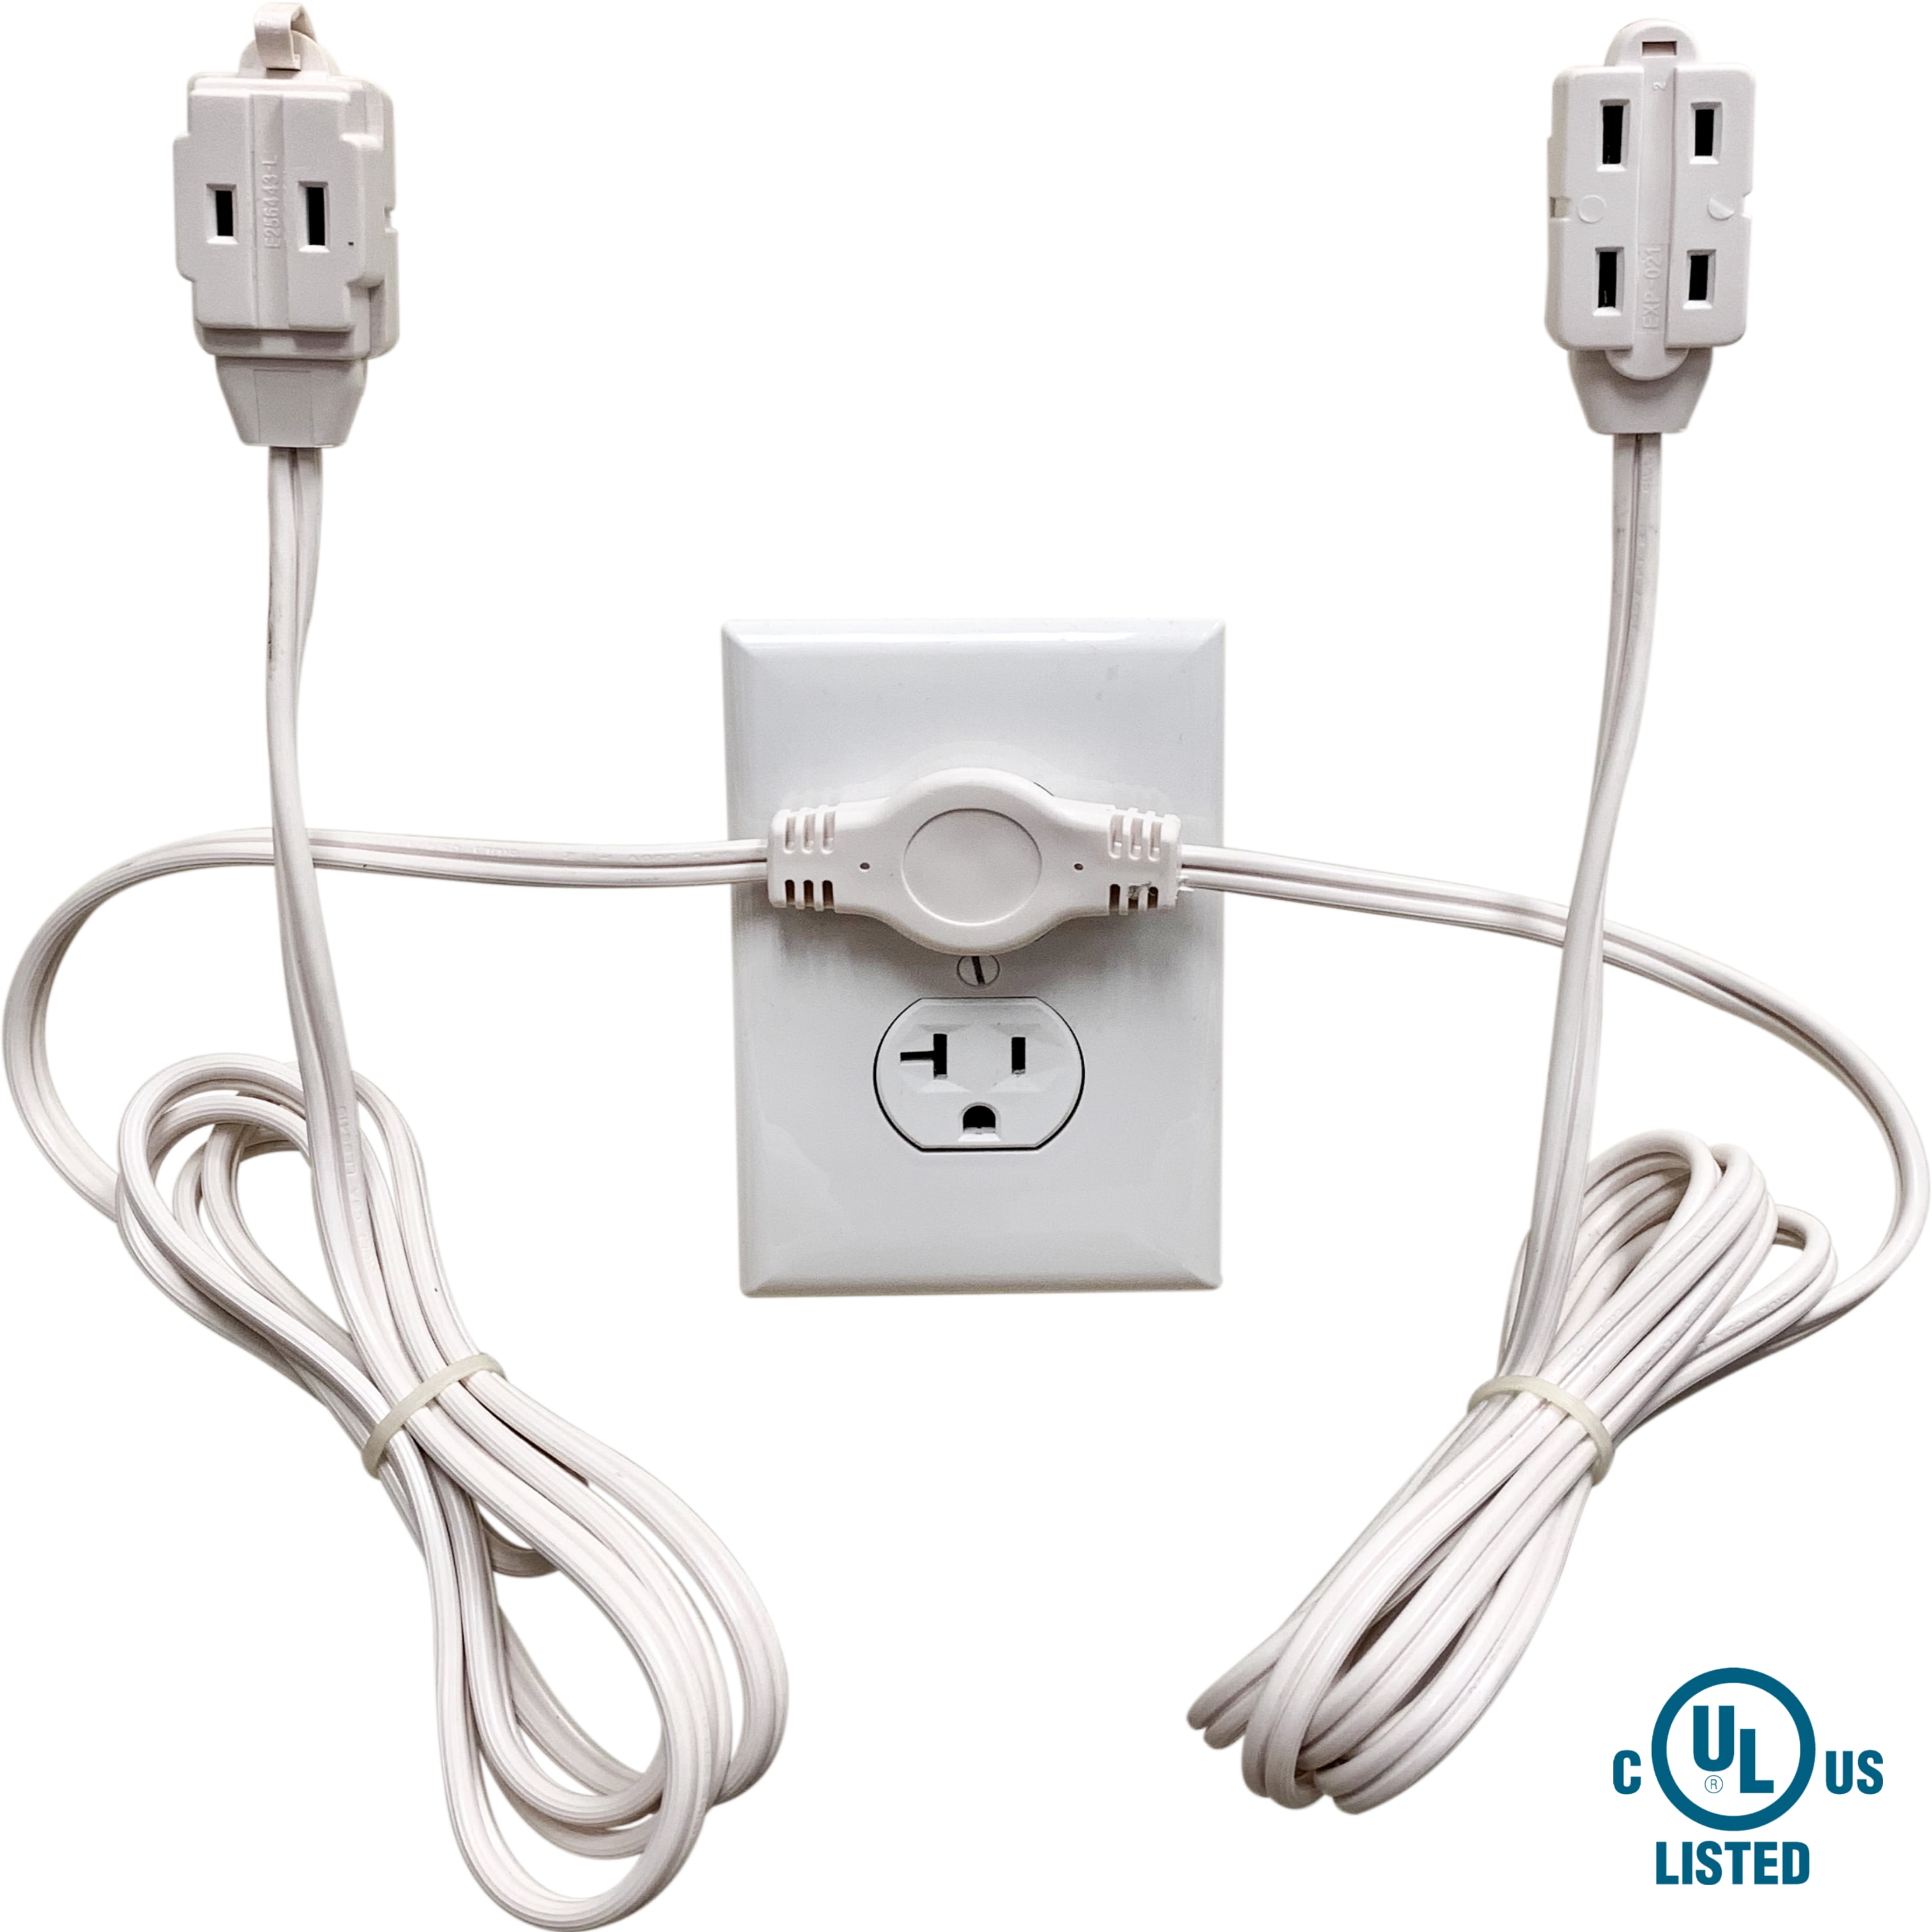 5ft Extension Cord 2 Prong AC Power 3 Outlets W Safety-Outlet Cover White Cable 